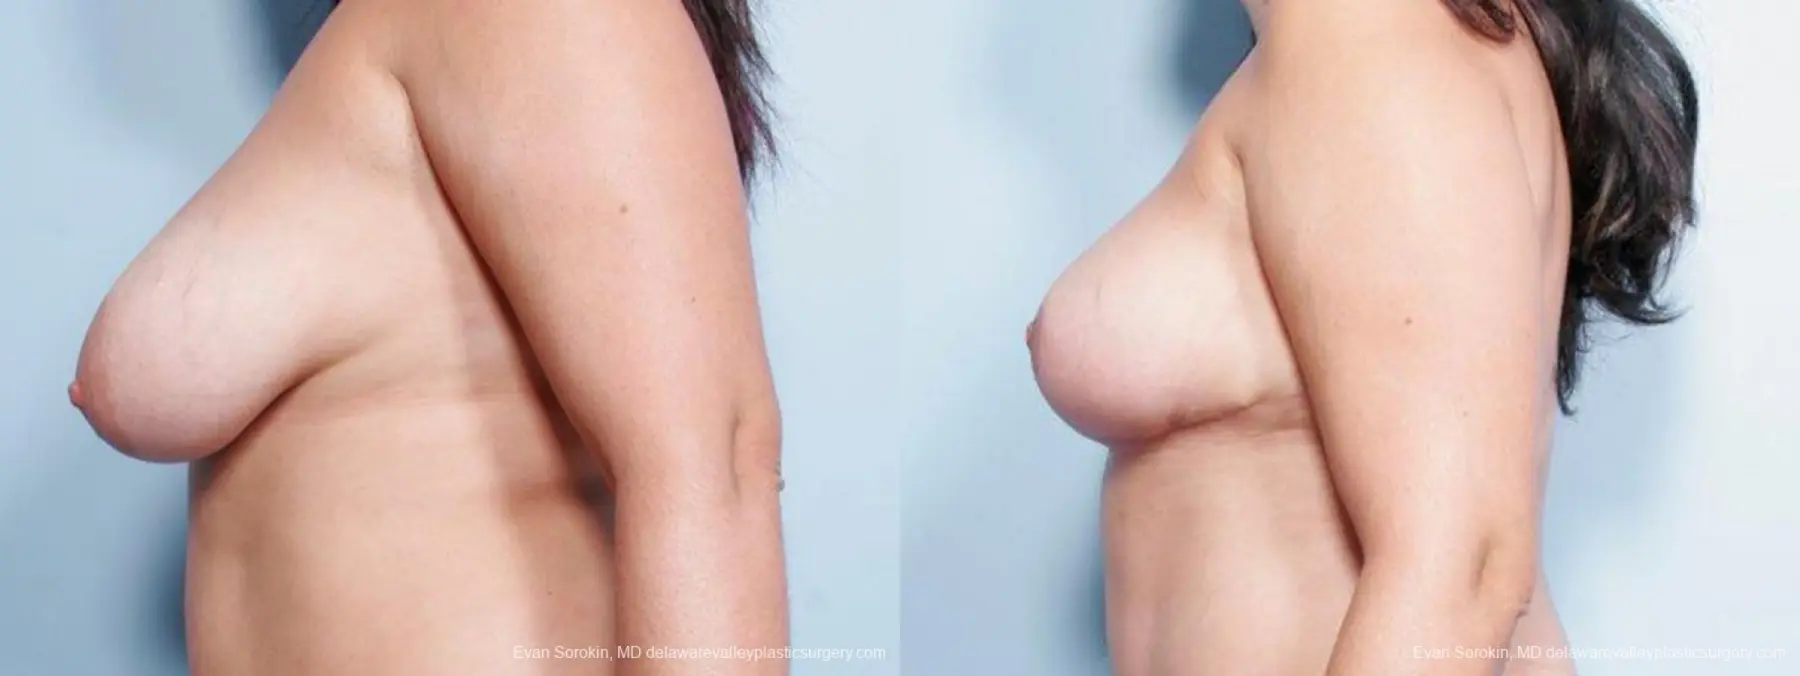 Philadelphia Breast Reduction 9441 - Before and After 5